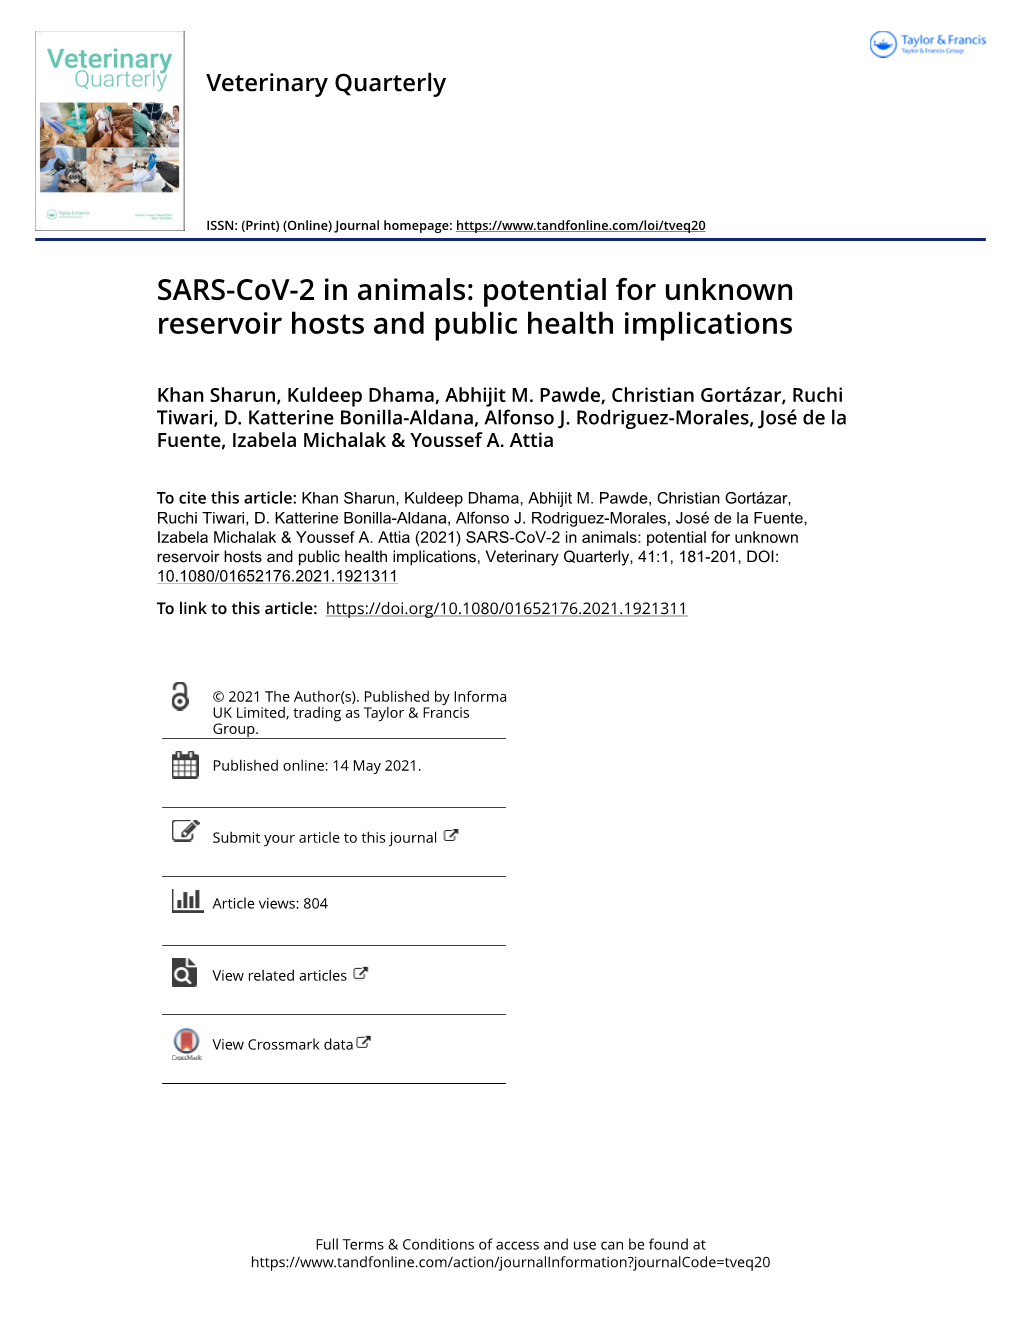 SARS-Cov-2 in Animals: Potential for Unknown Reservoir Hosts and Public Health Implications